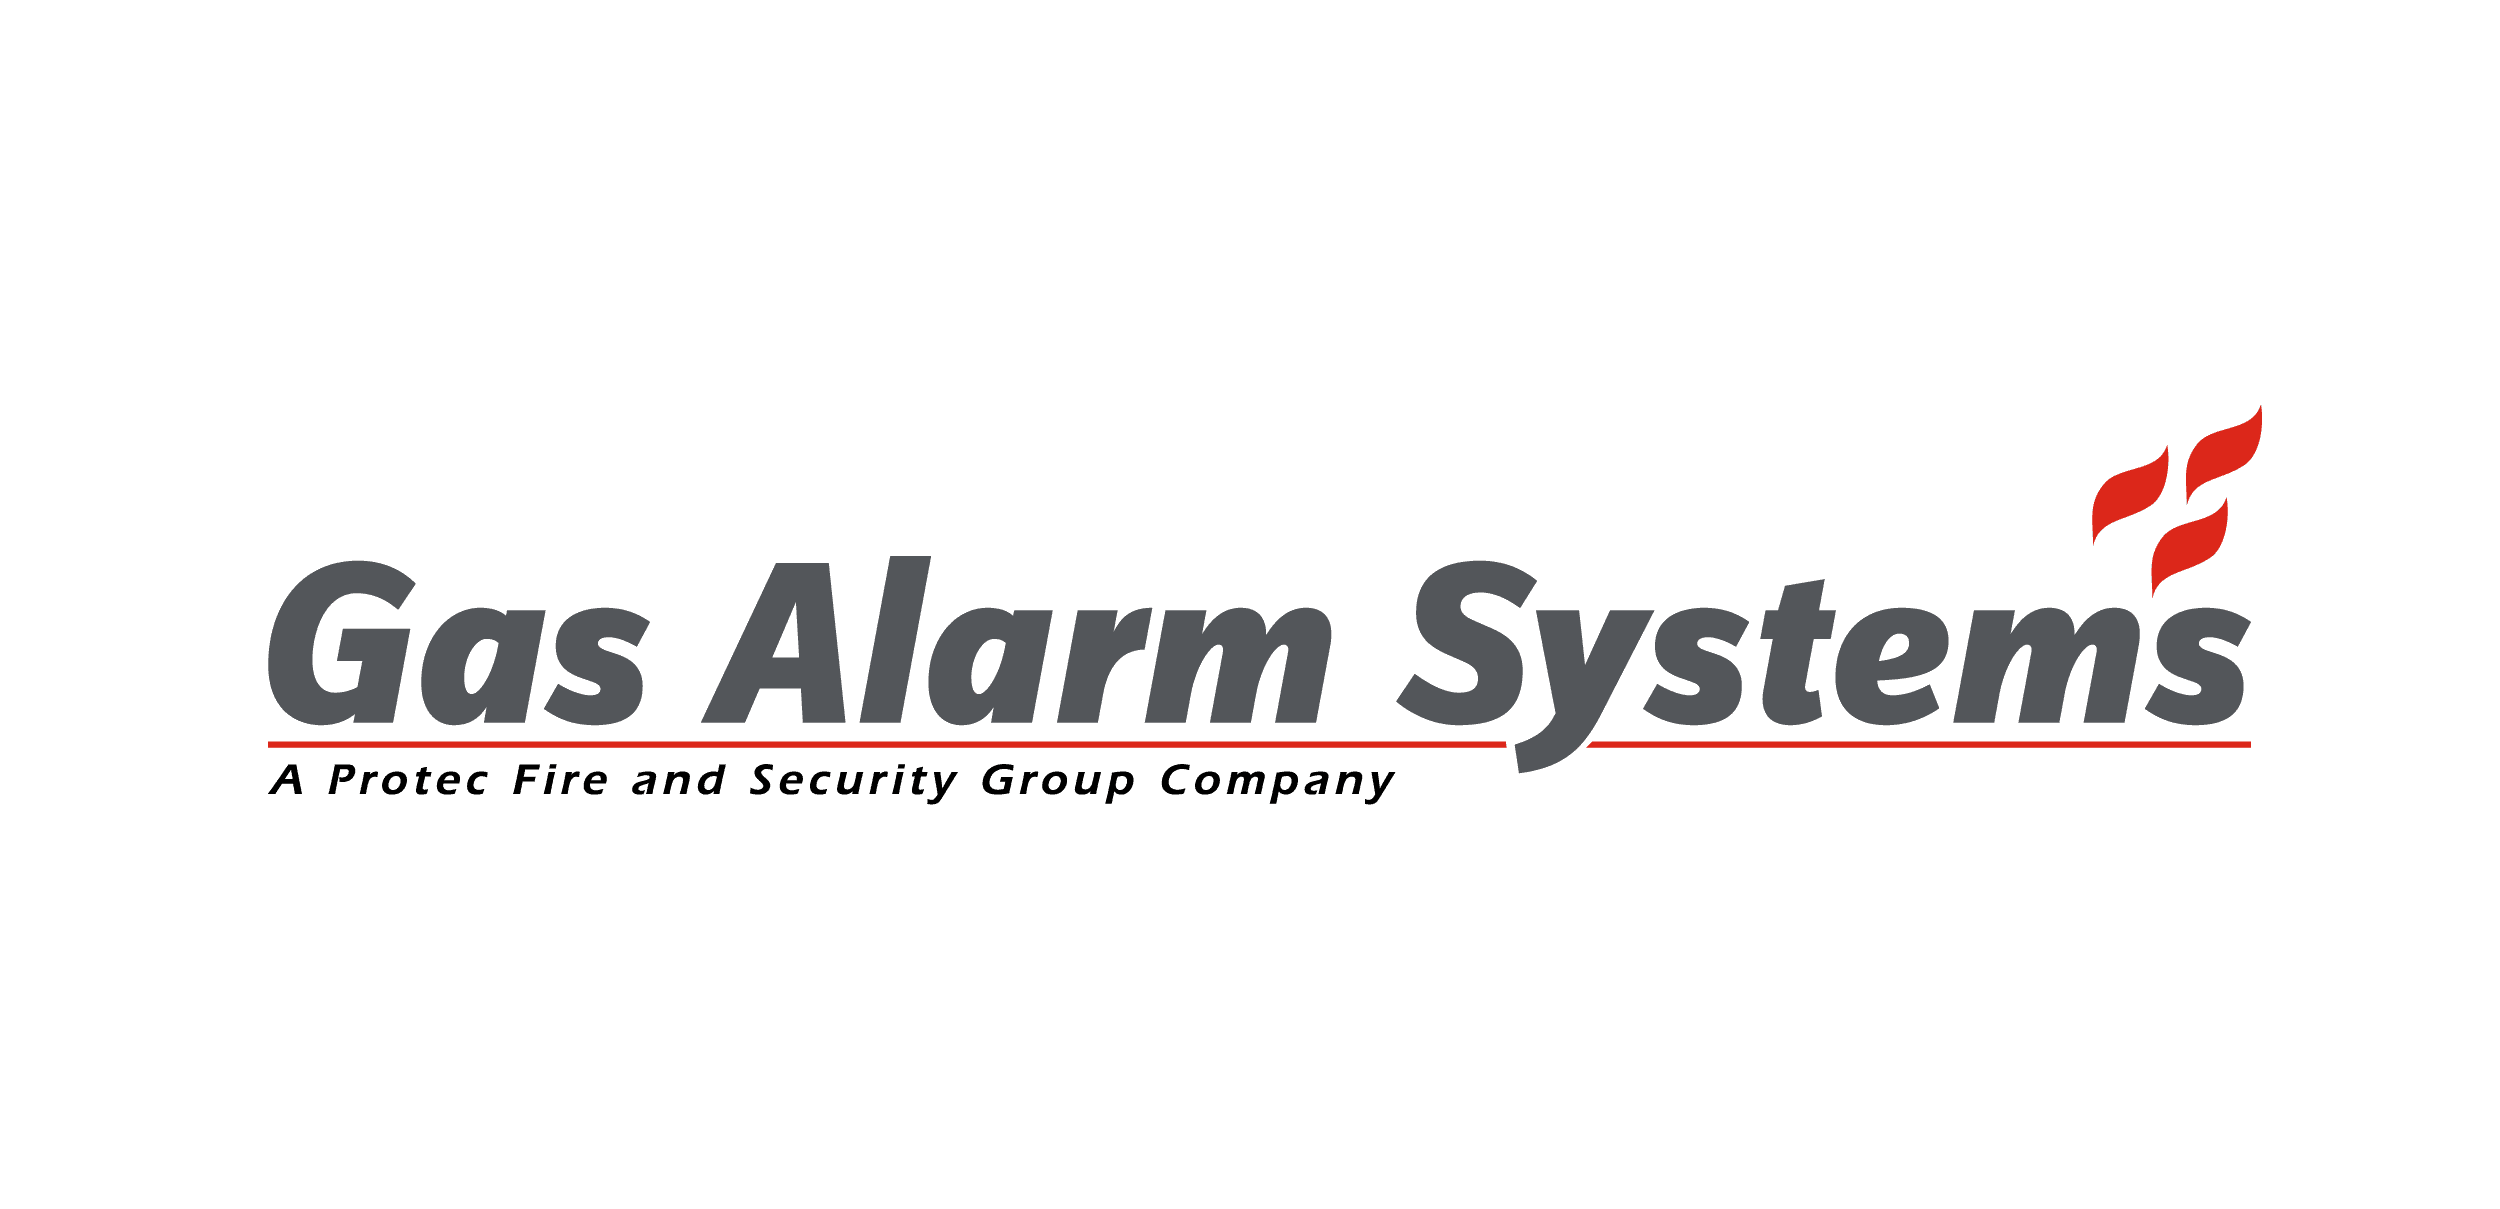 Gas Alarm Systems - Home Page